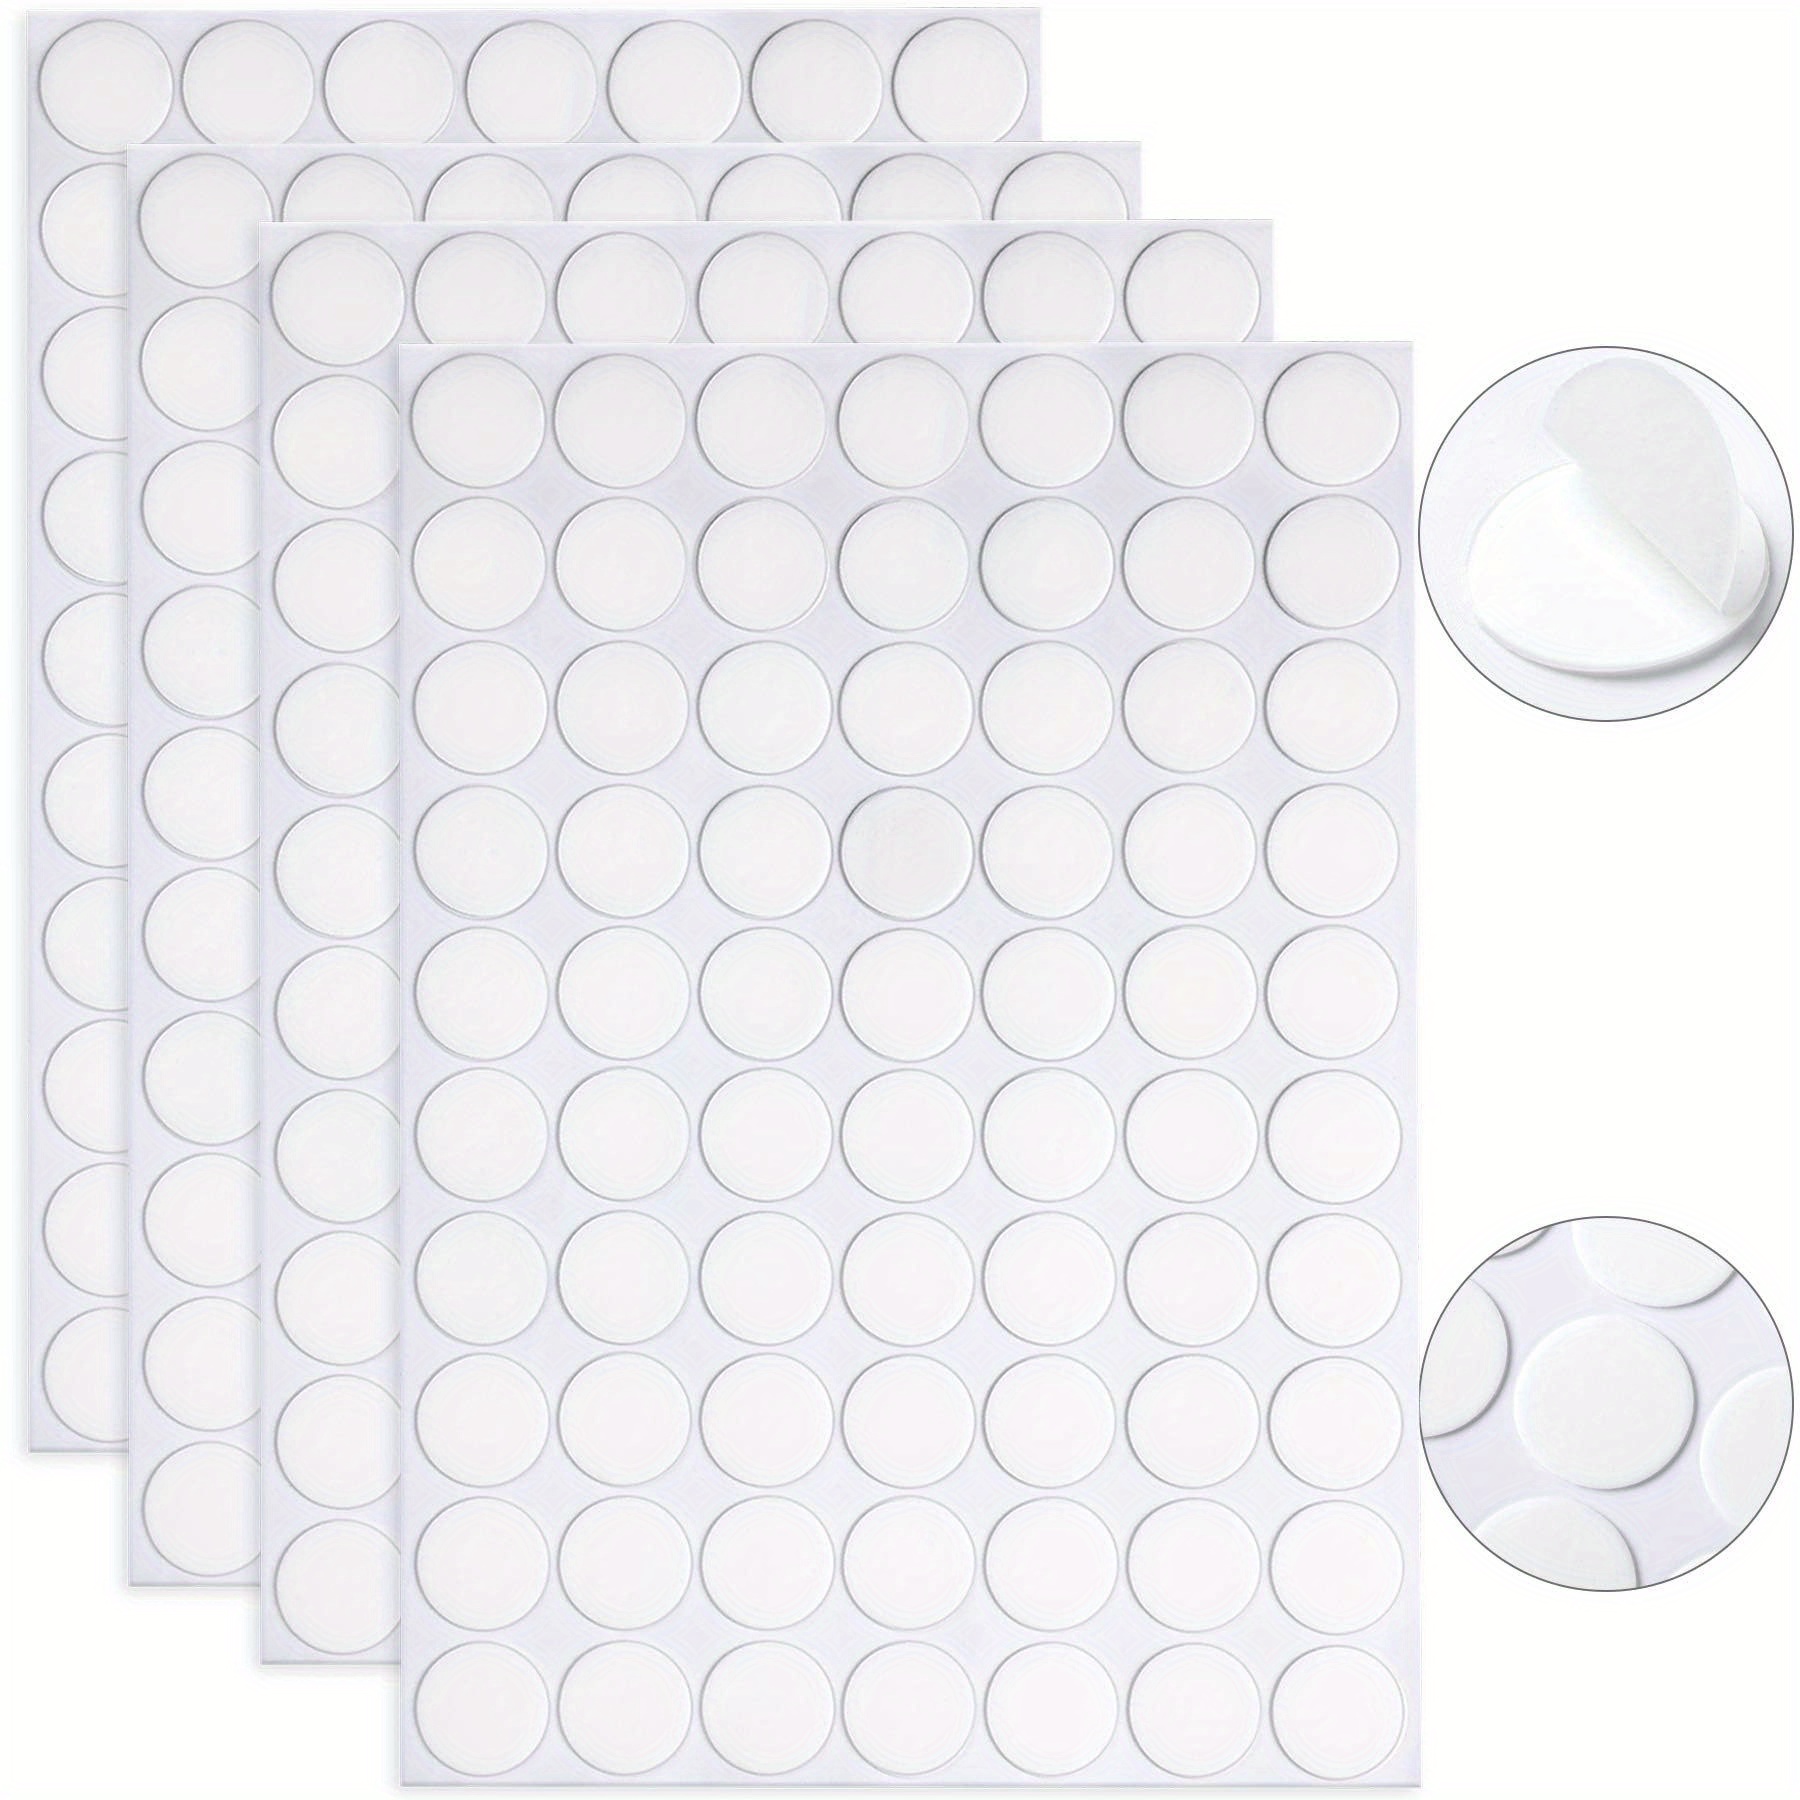 Ultra Thin Adhesive Dots Double-sided Adhesive Sticky Dots For Diy